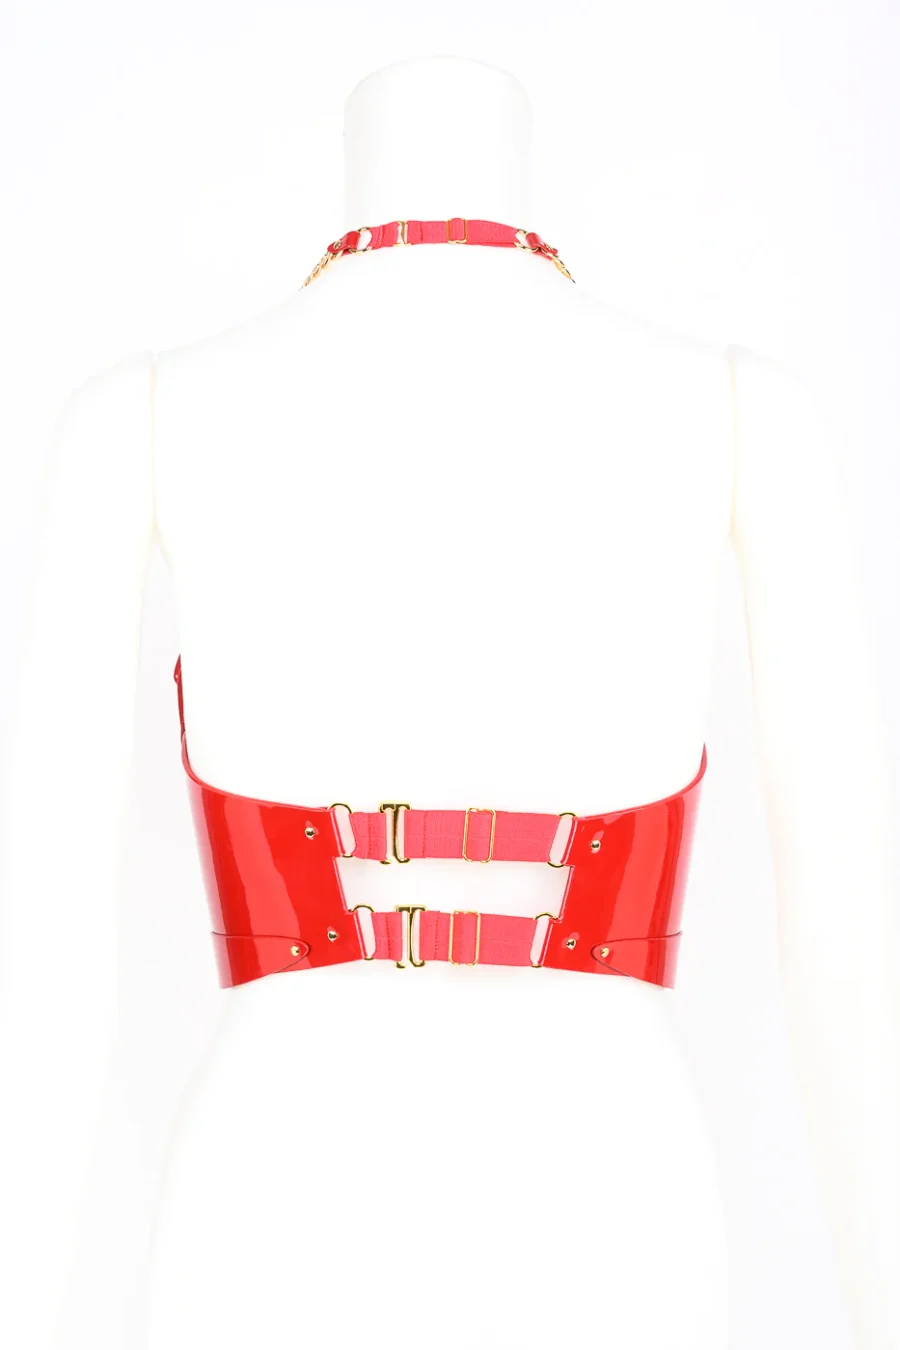 Fraulein Kink Roja Cast Corset With Spikes 4